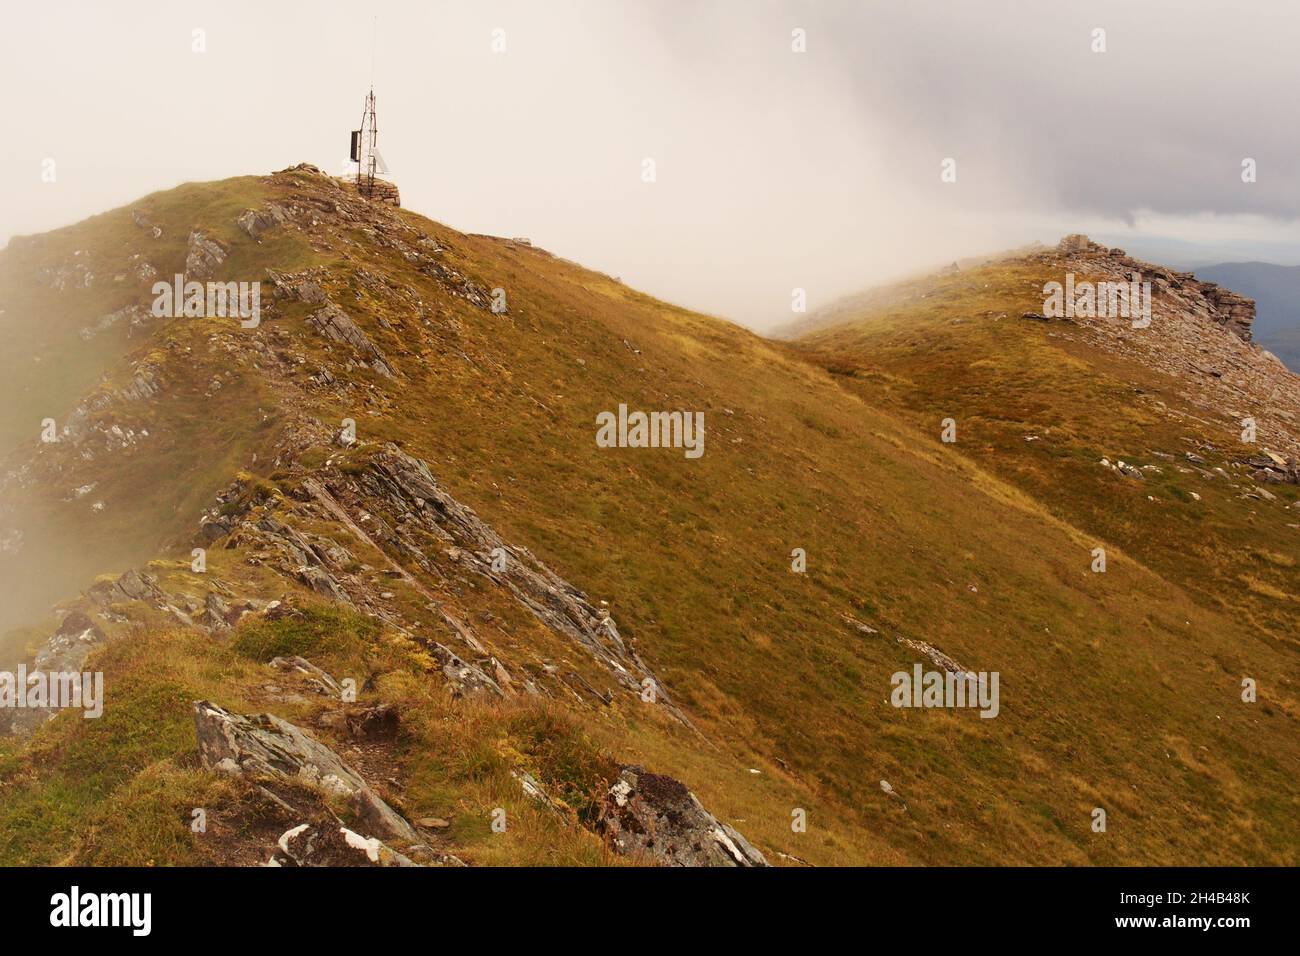 A view looking across the peaks of Ben Stack, Sutherland, Scotland with the omnidirectional radio antenna in view and mountain mist arriving Stock Photo